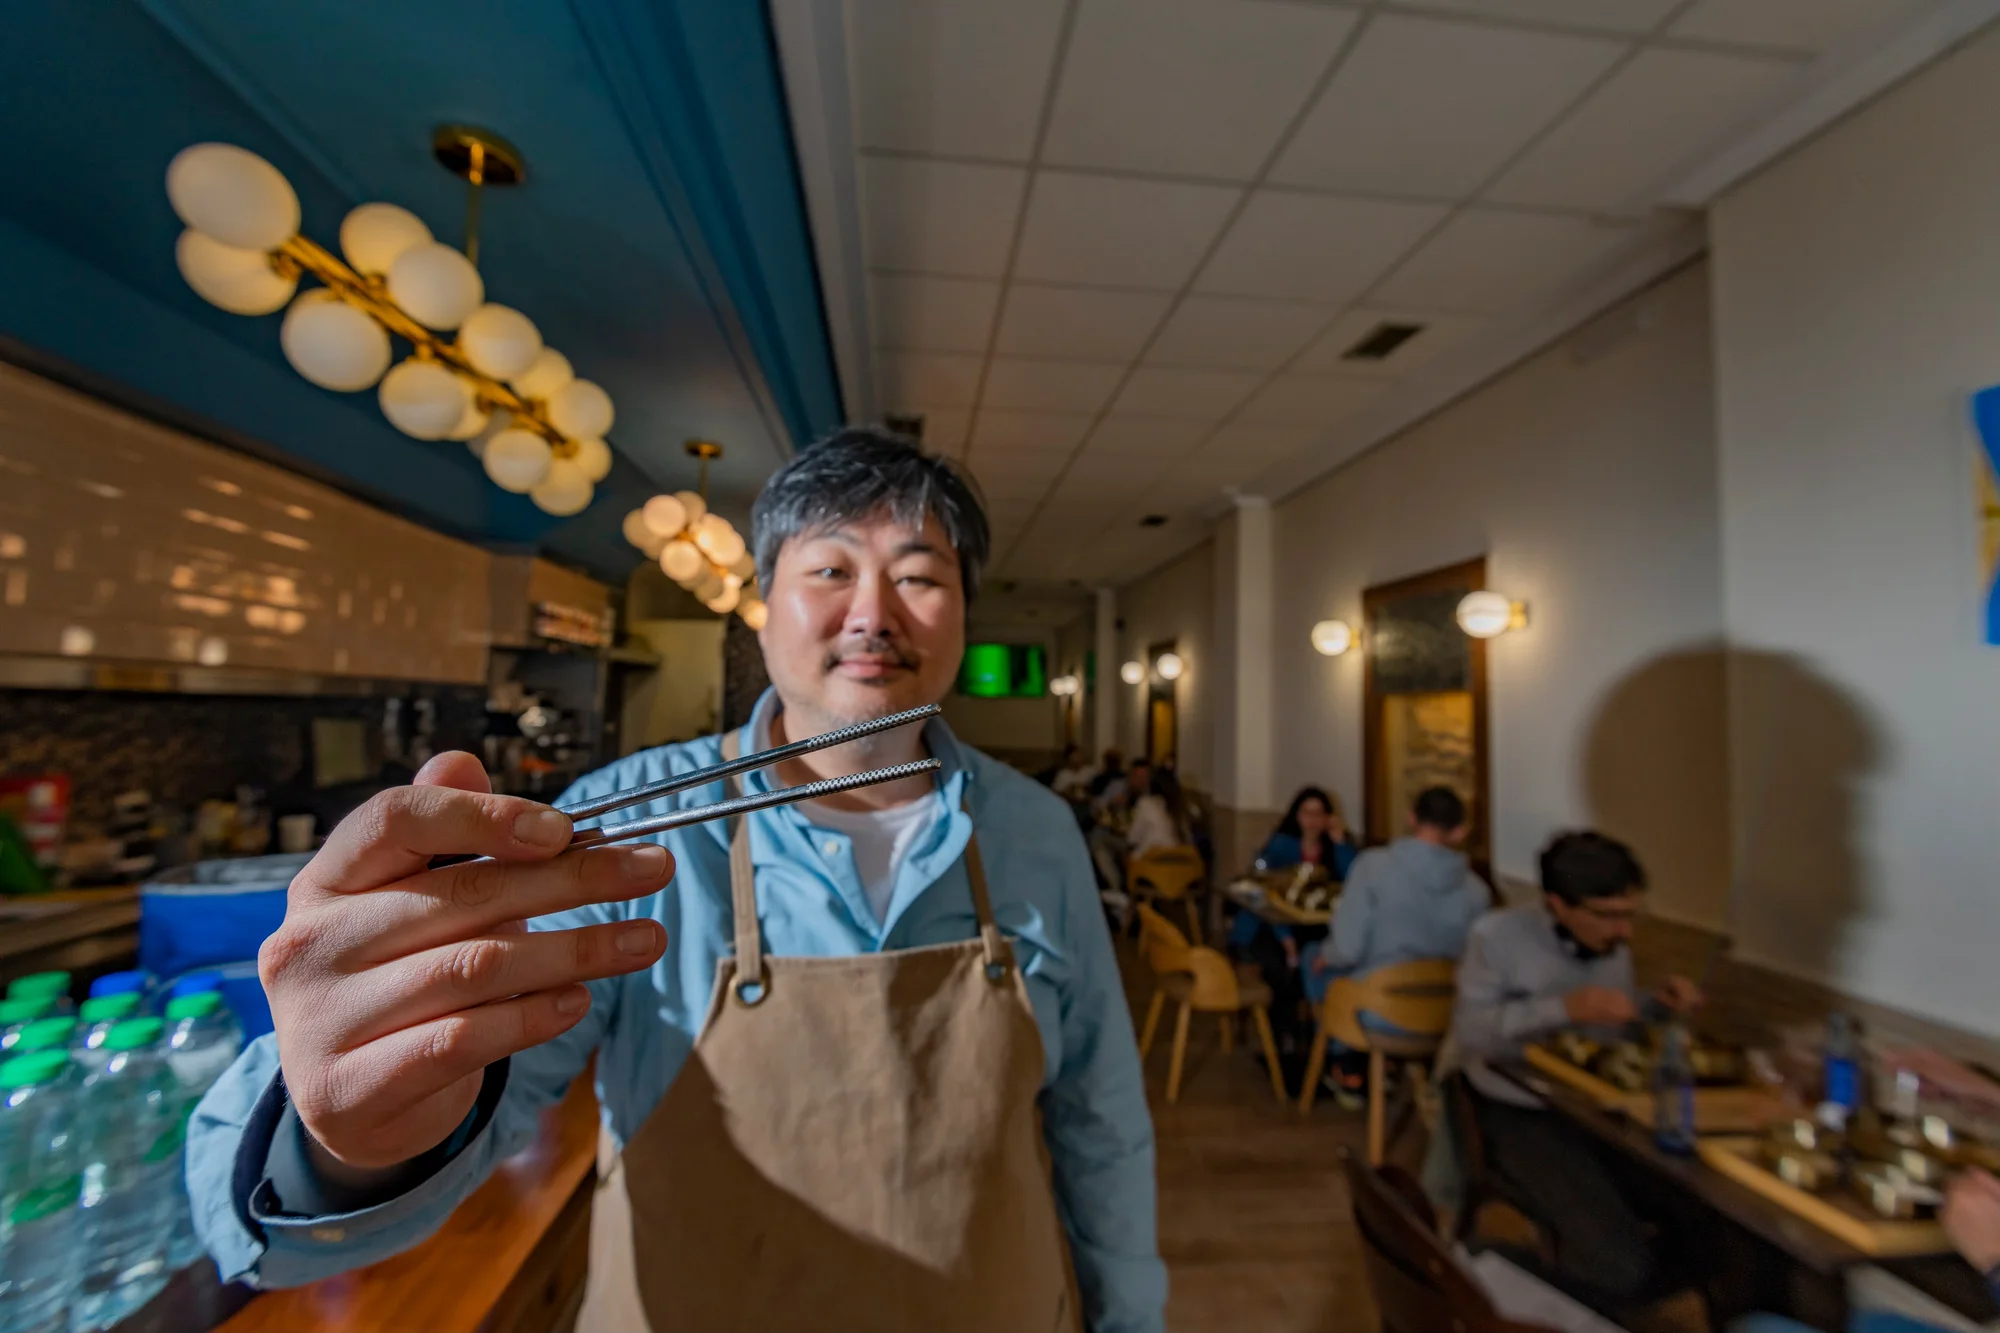 Photograph of a person of Asian origin holding chopsticks. The photograph was taken in a restaurant, in the background there are some tables.